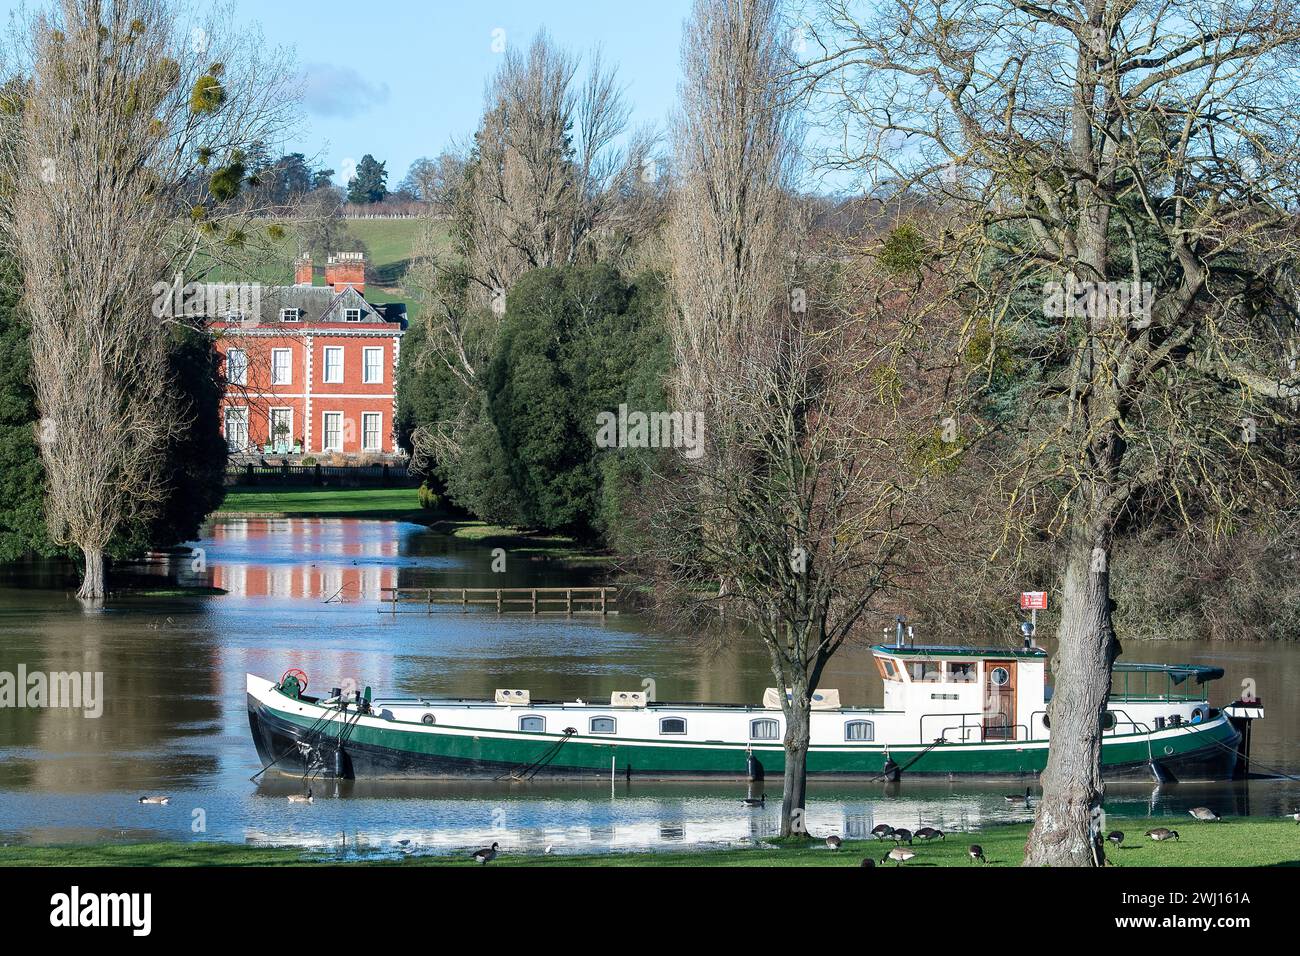 The River Thames has burst its banks at Henley on Thames in Oxfordshire. A Flood Warning is in place for the River Thames for Henley, Remenham and Medmenham. Property flooding is expected and river levels are expected to continue to rise Stock Photo